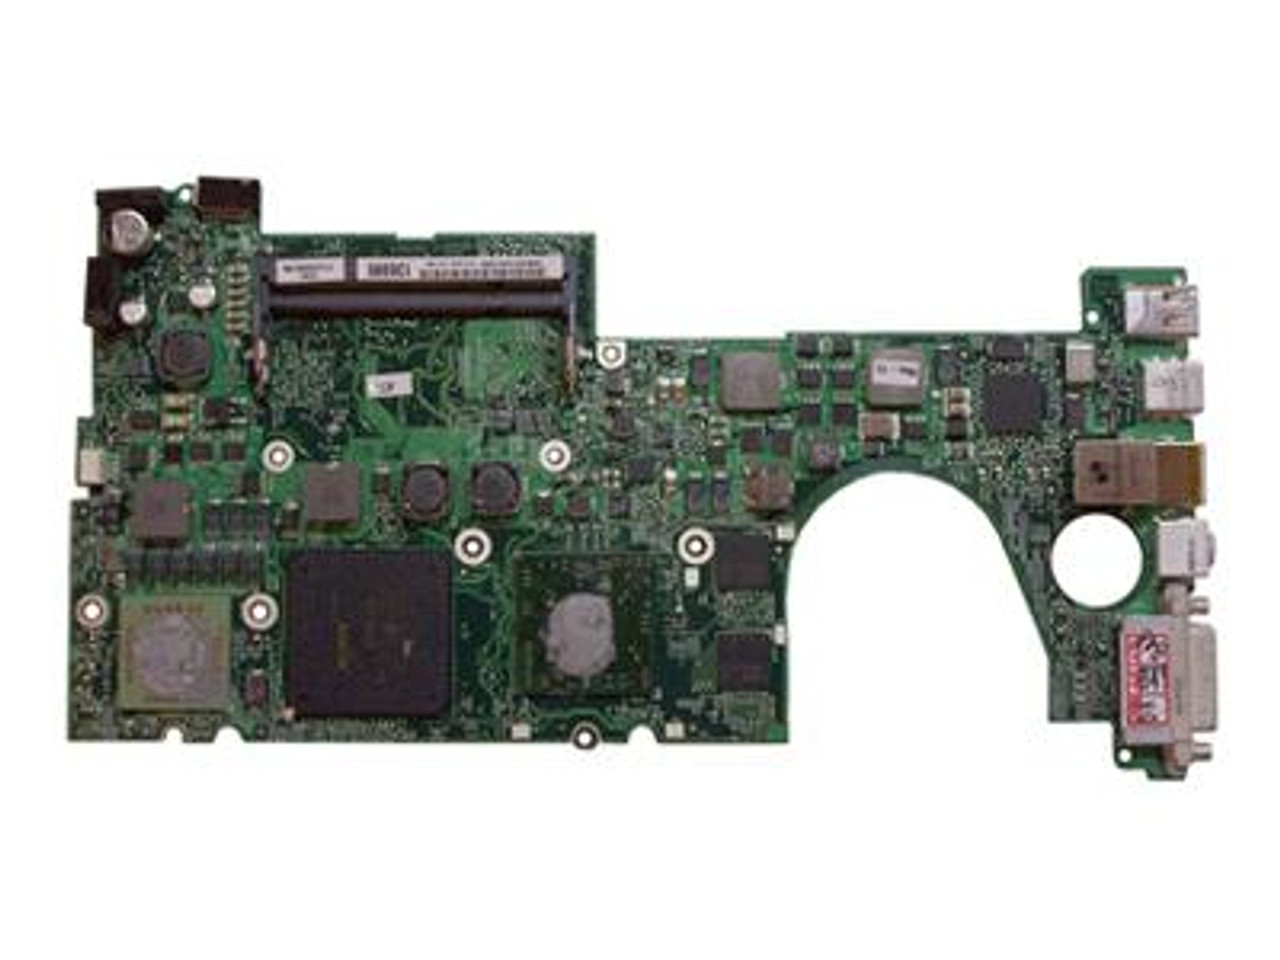 661-3748 Apple System Board (Motherboard) 1.67GHz CPU for PowerPC 7447a (G4) (Refurbished)